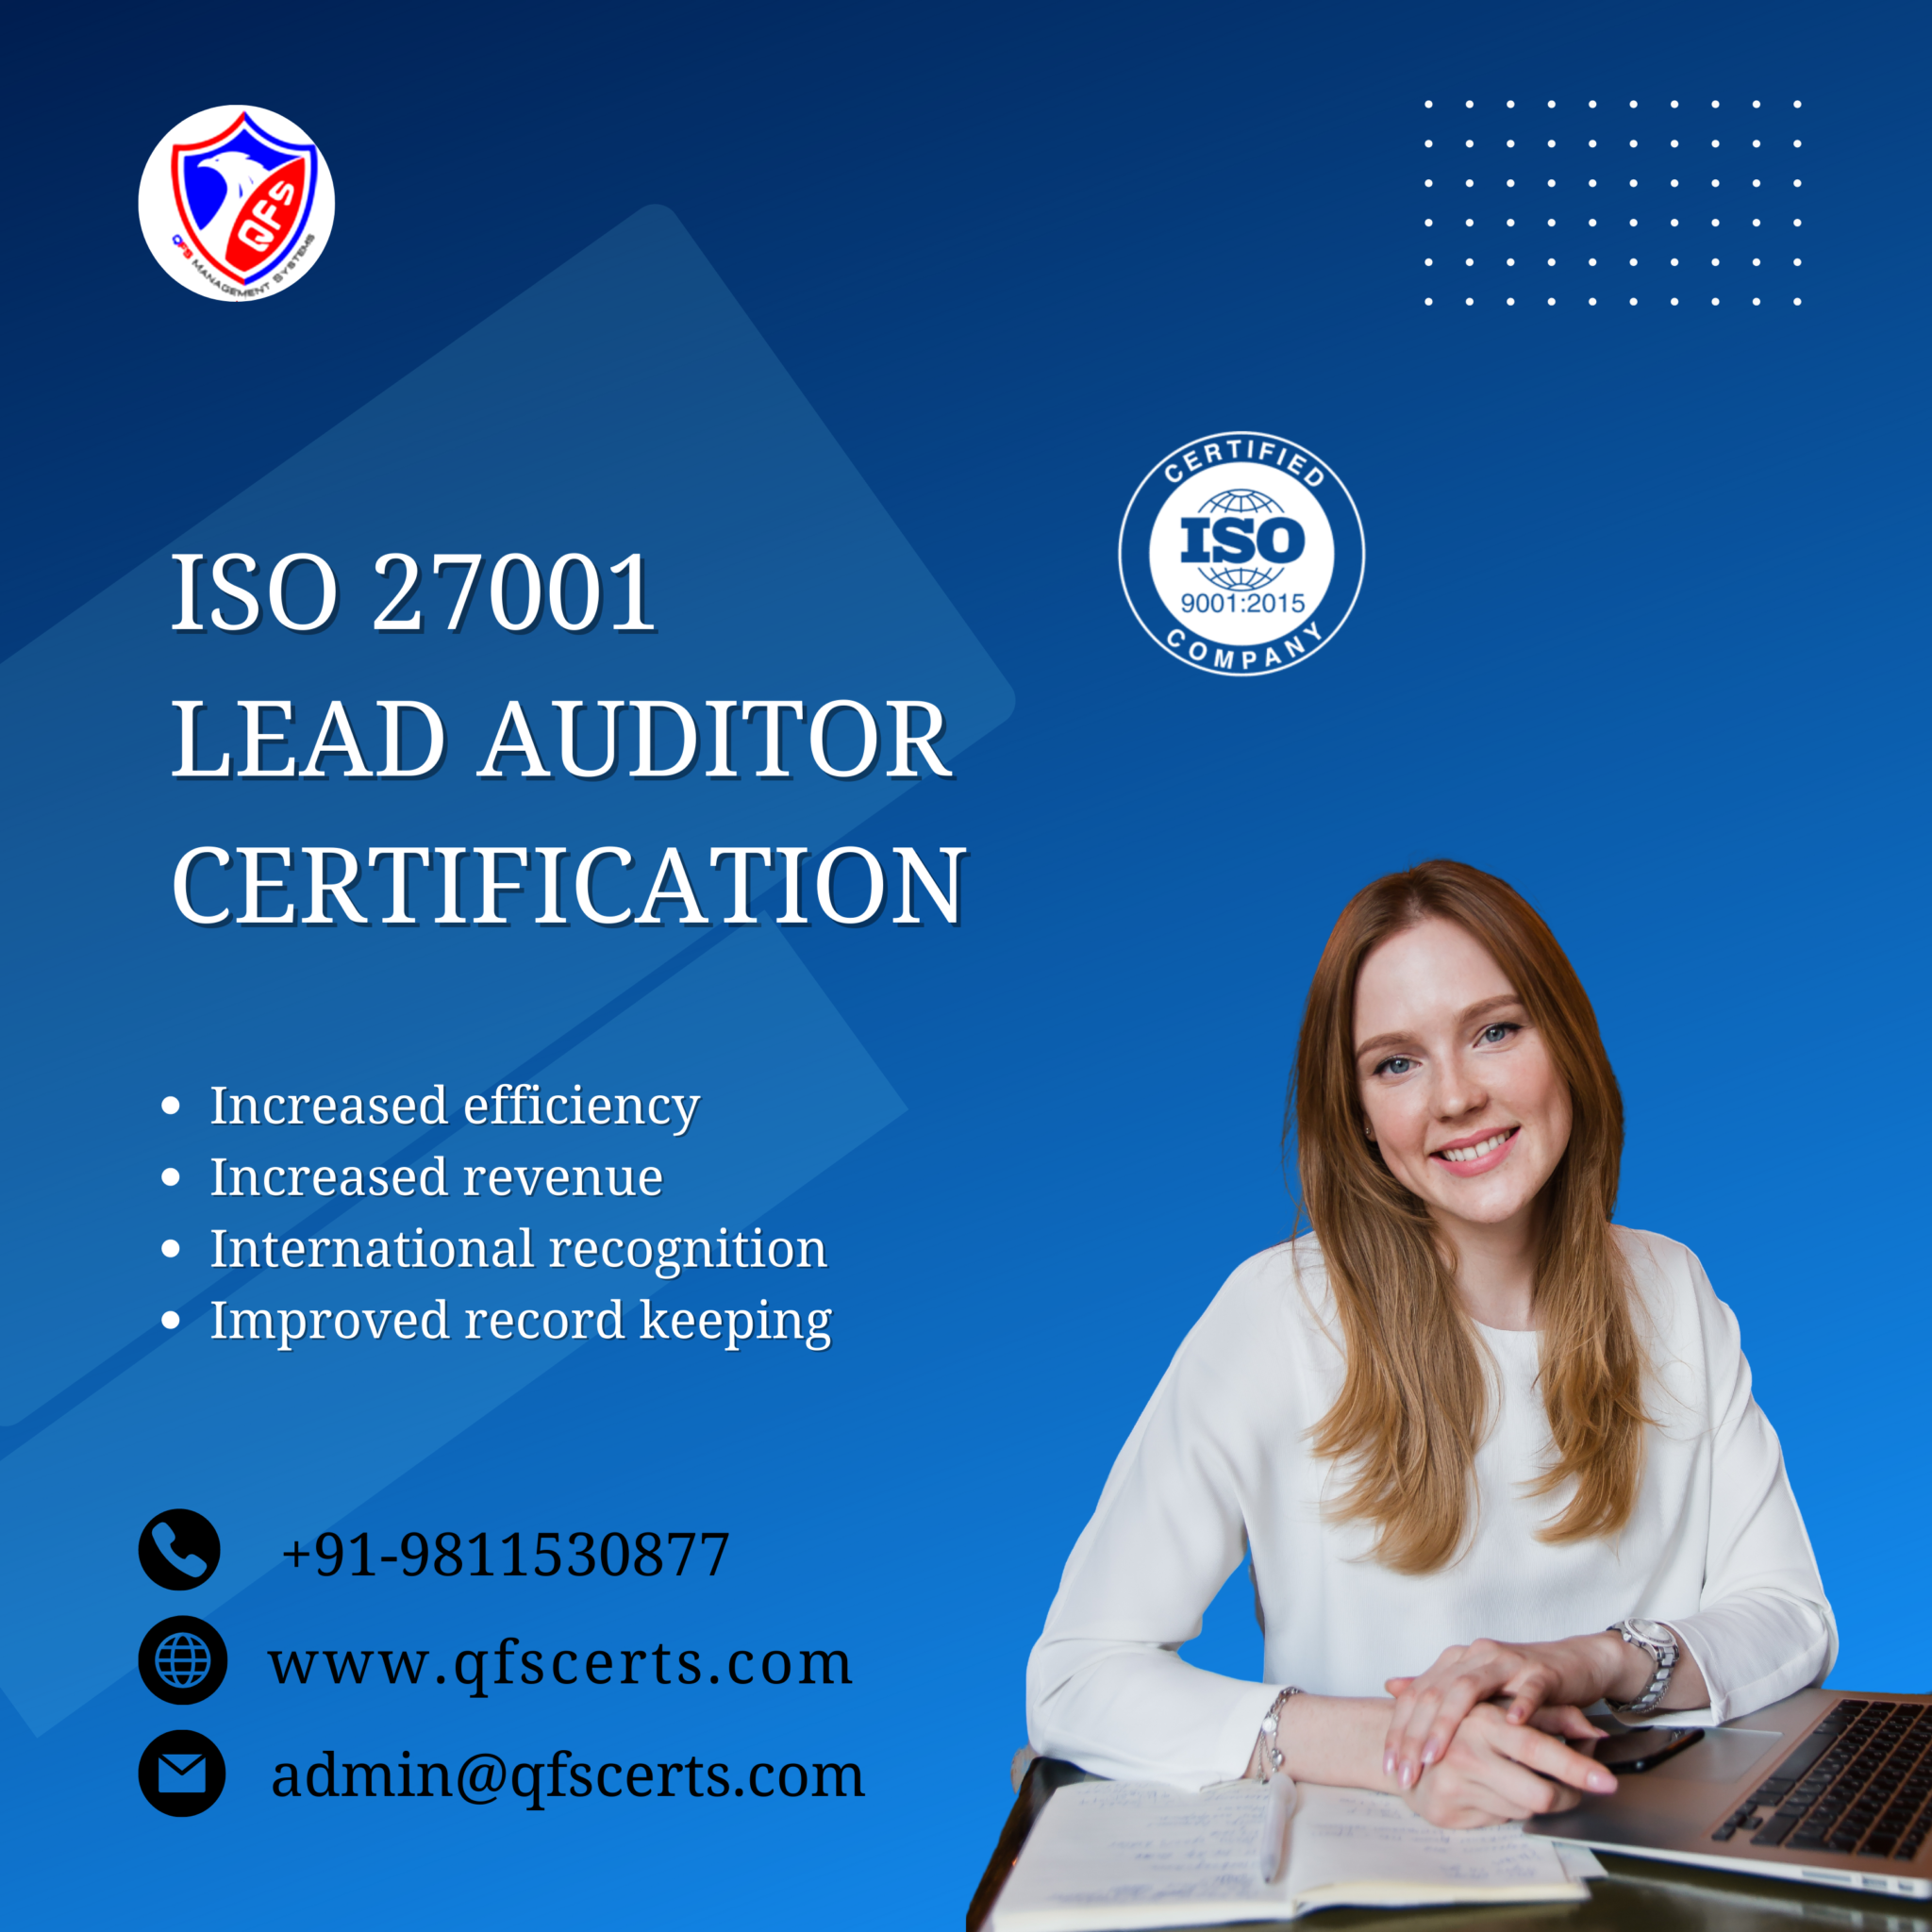 How important is ISO 27001 Lead Auditor Certification?